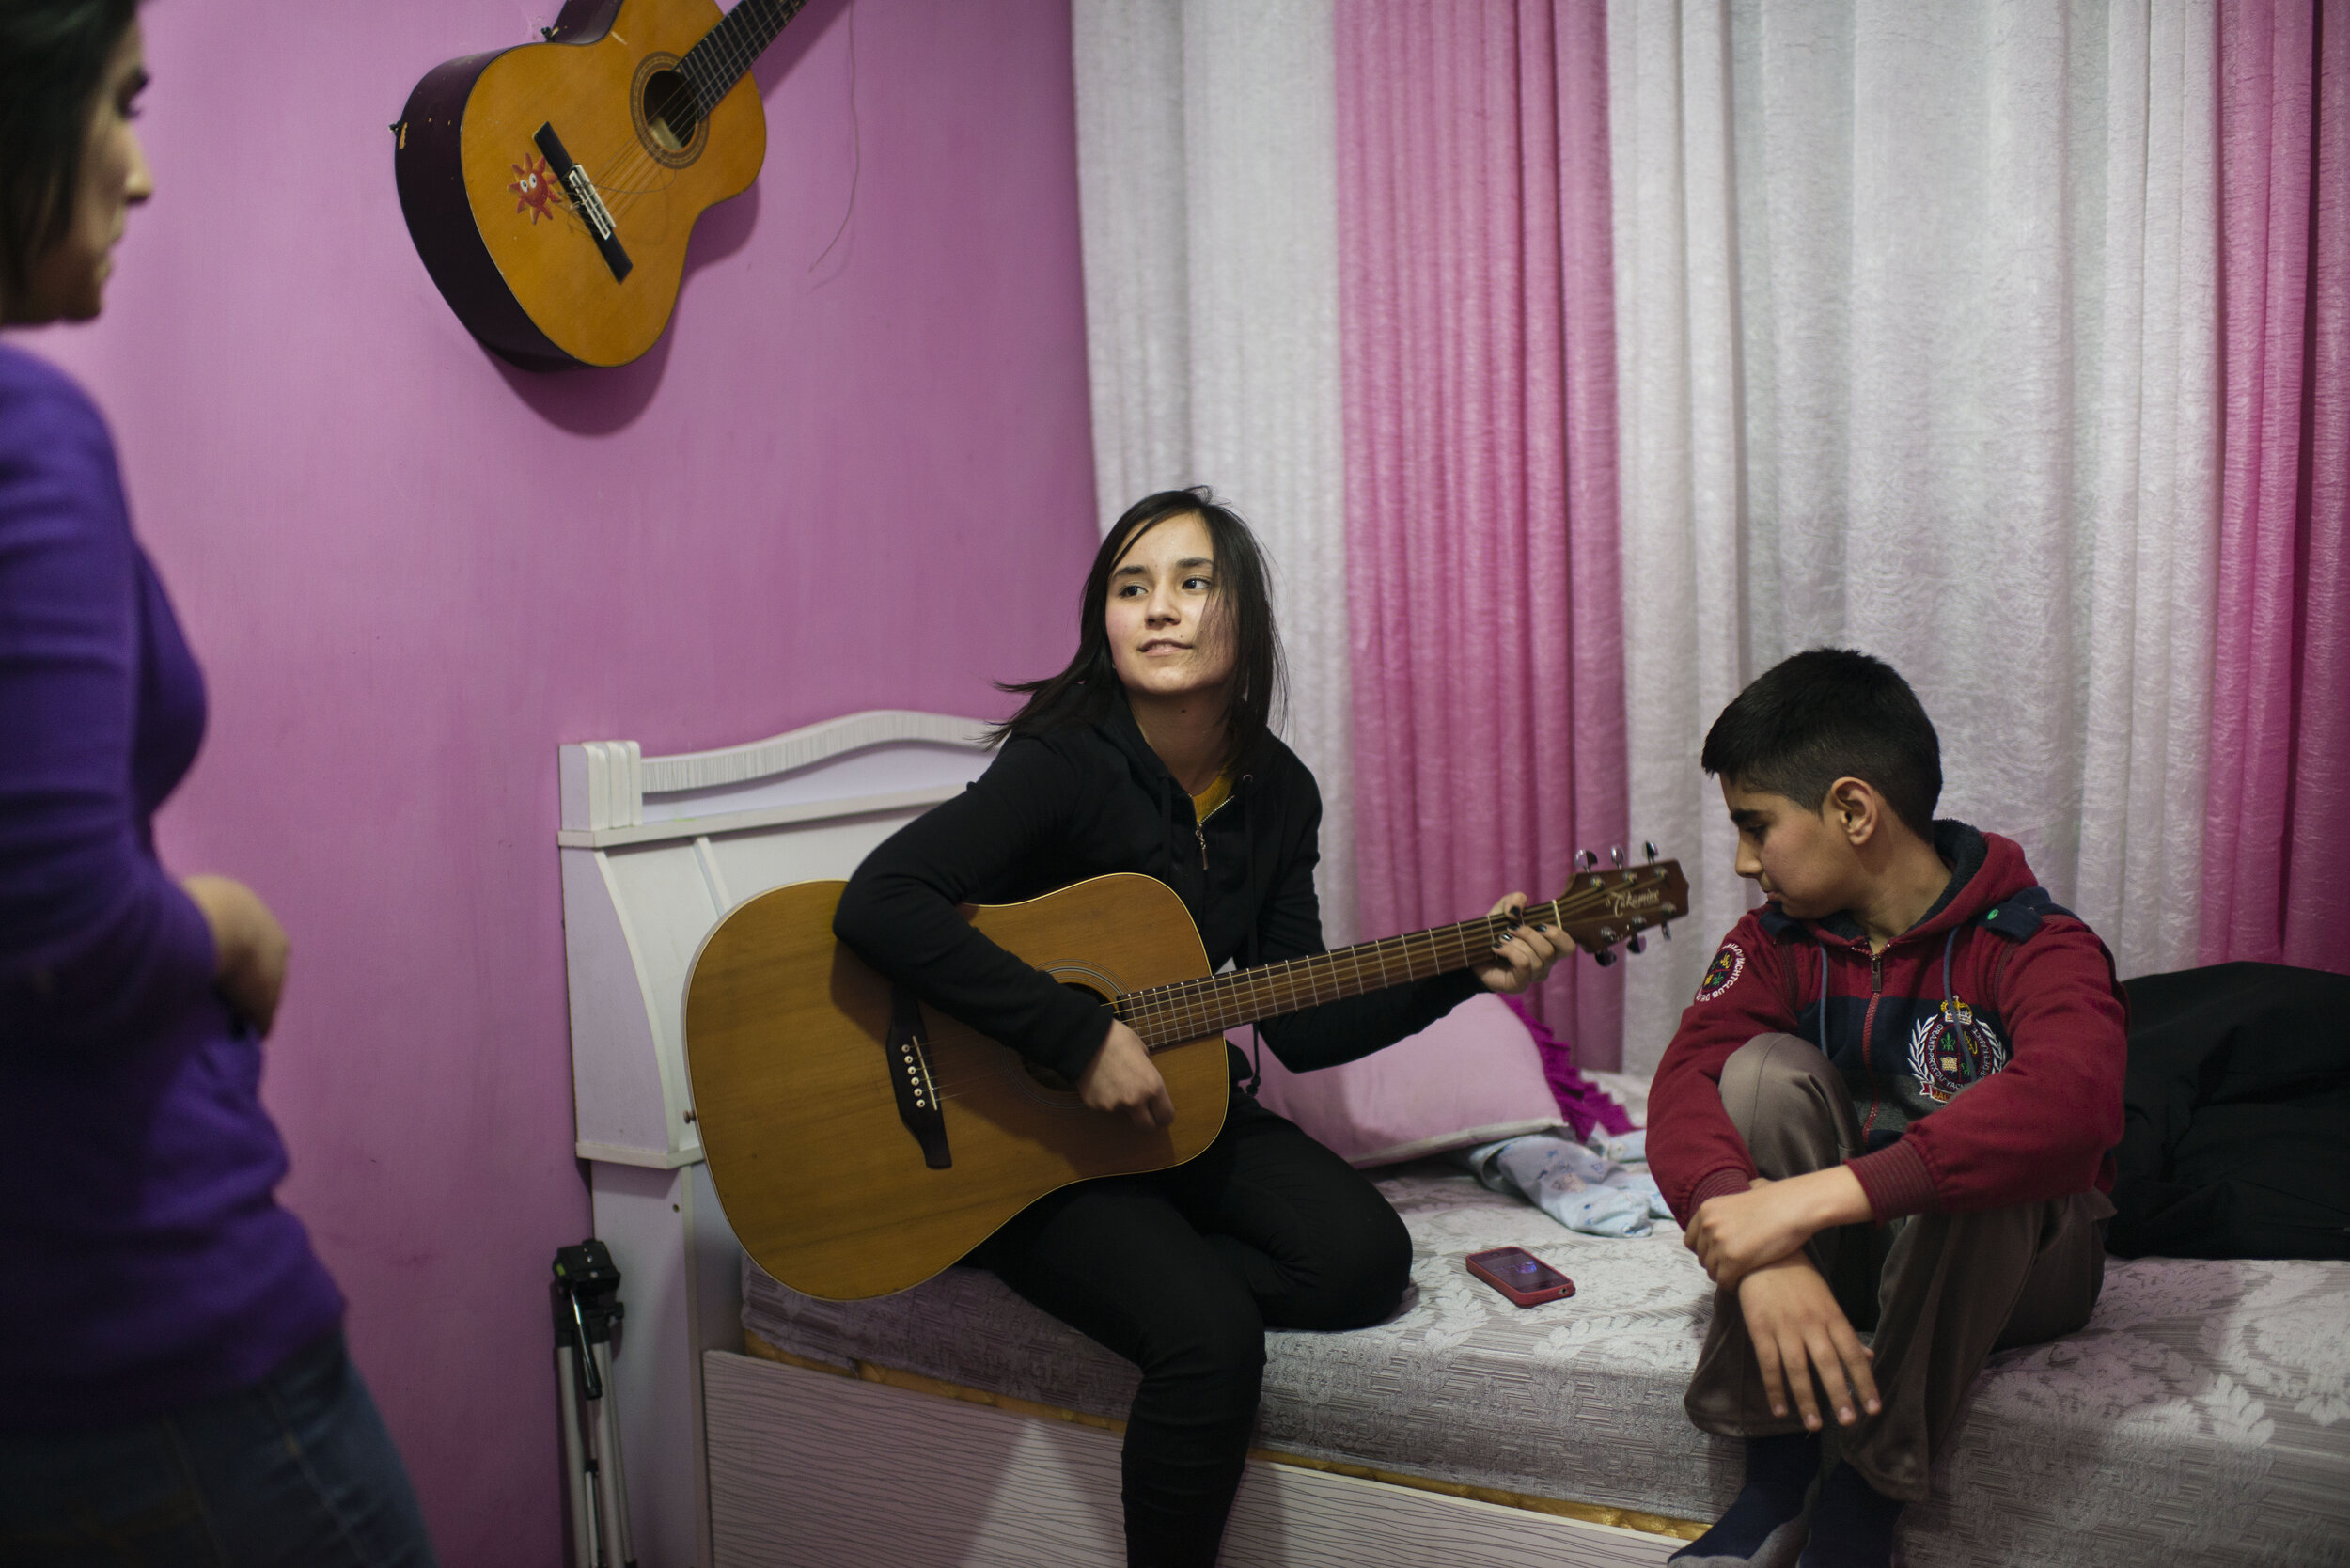  Zhala, age 16, plays a cover of an Avril Lavigne song as her brother and sister sing along in Kabul (2015). © Kiana Hayeri  